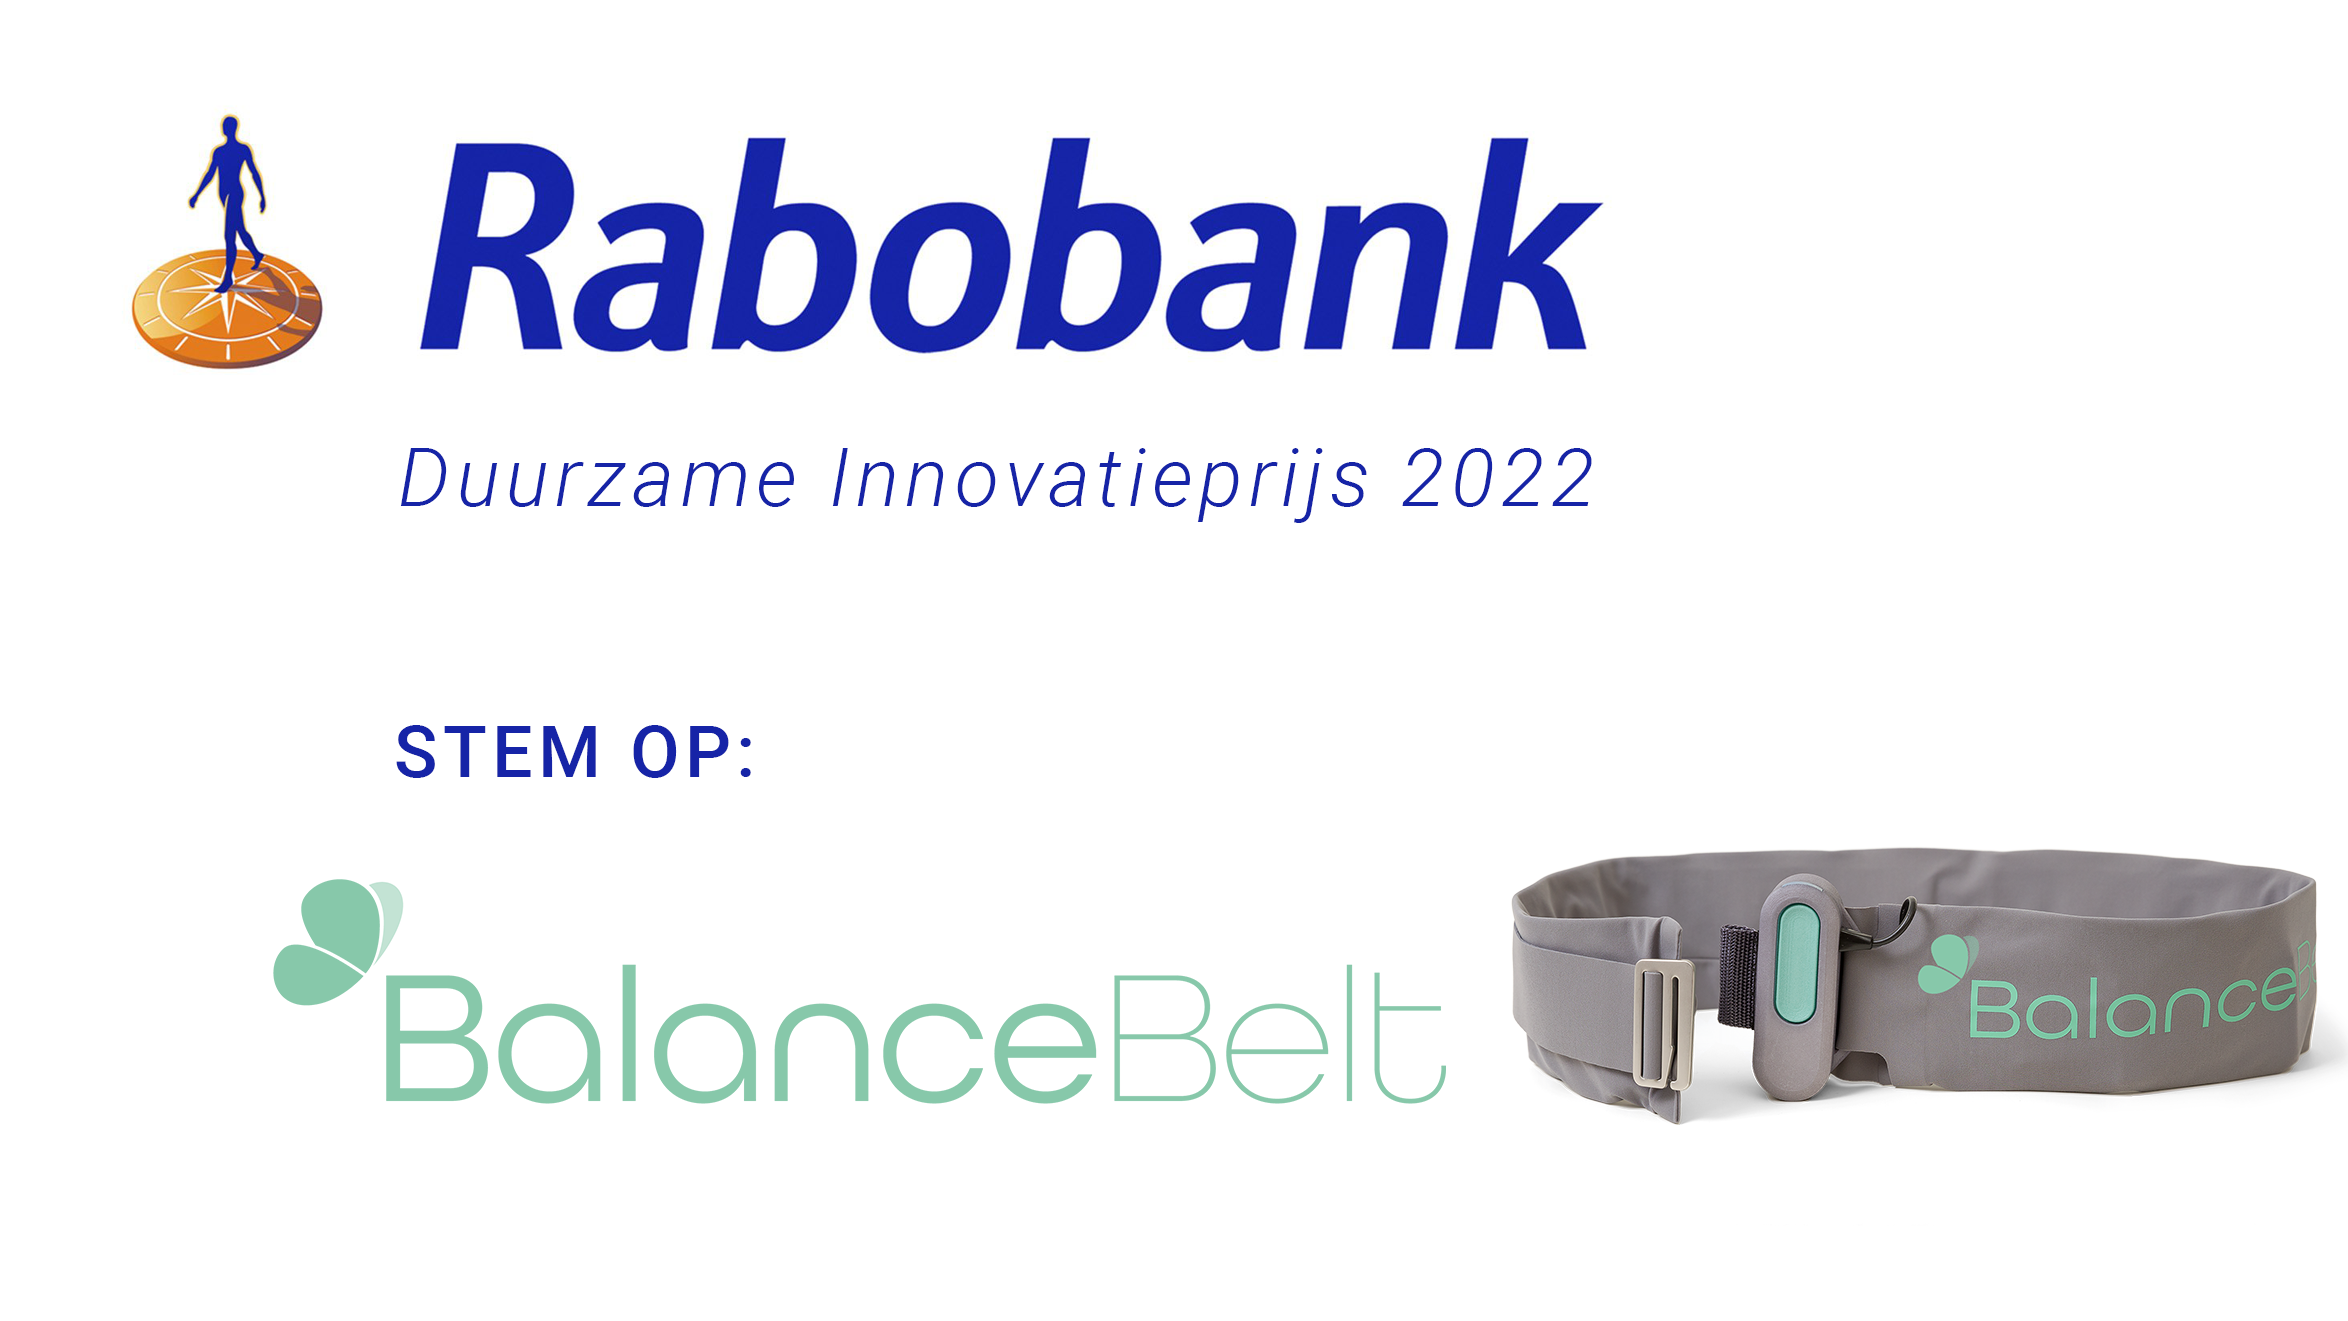 If you  are a Rabobank user: Please Vote For Us!